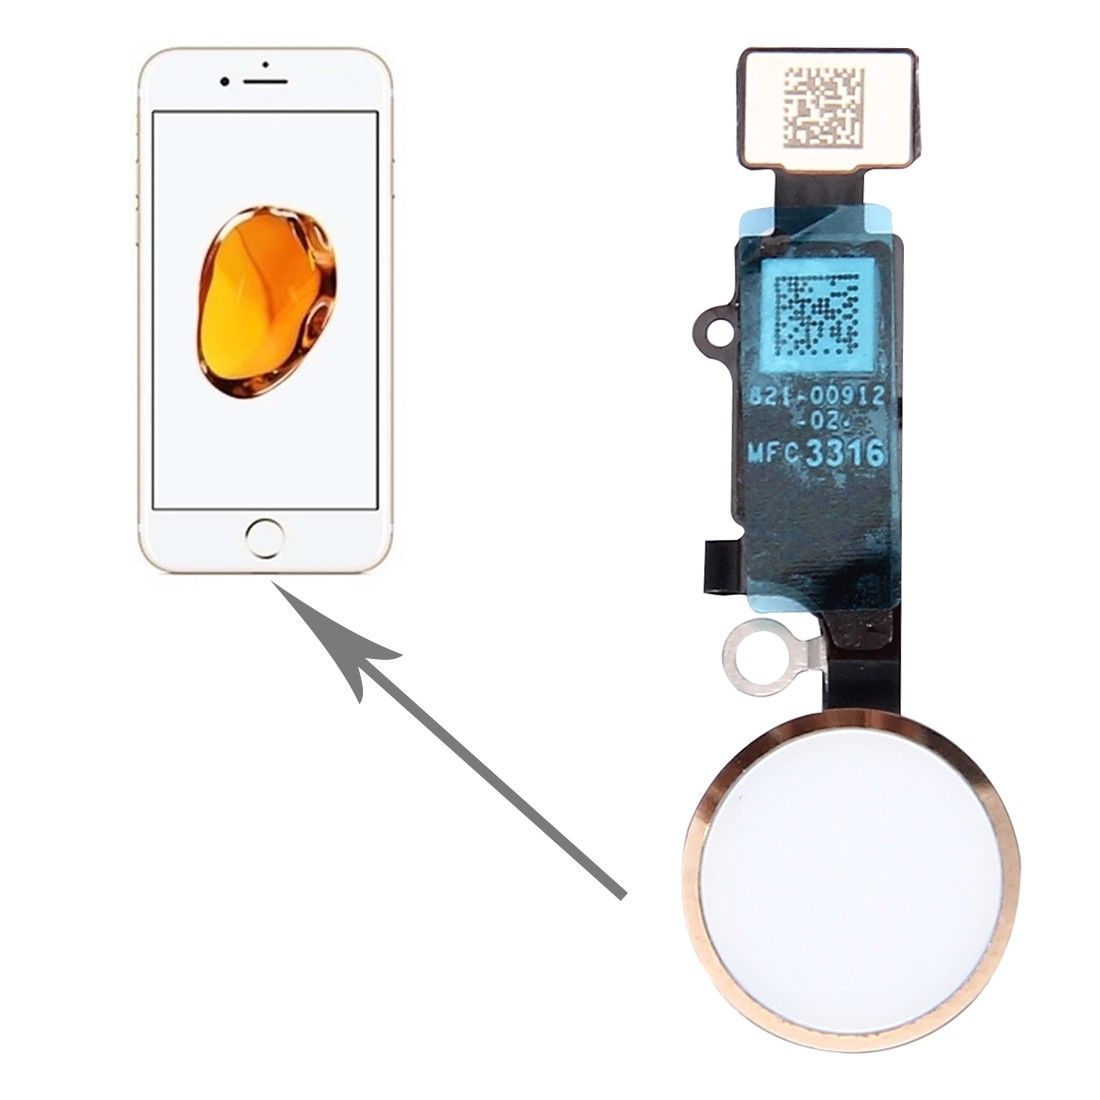 Apple iPhone 7 / 7 Plus Home Button Flex Cable - Gold for [product_price] - First Help Tech